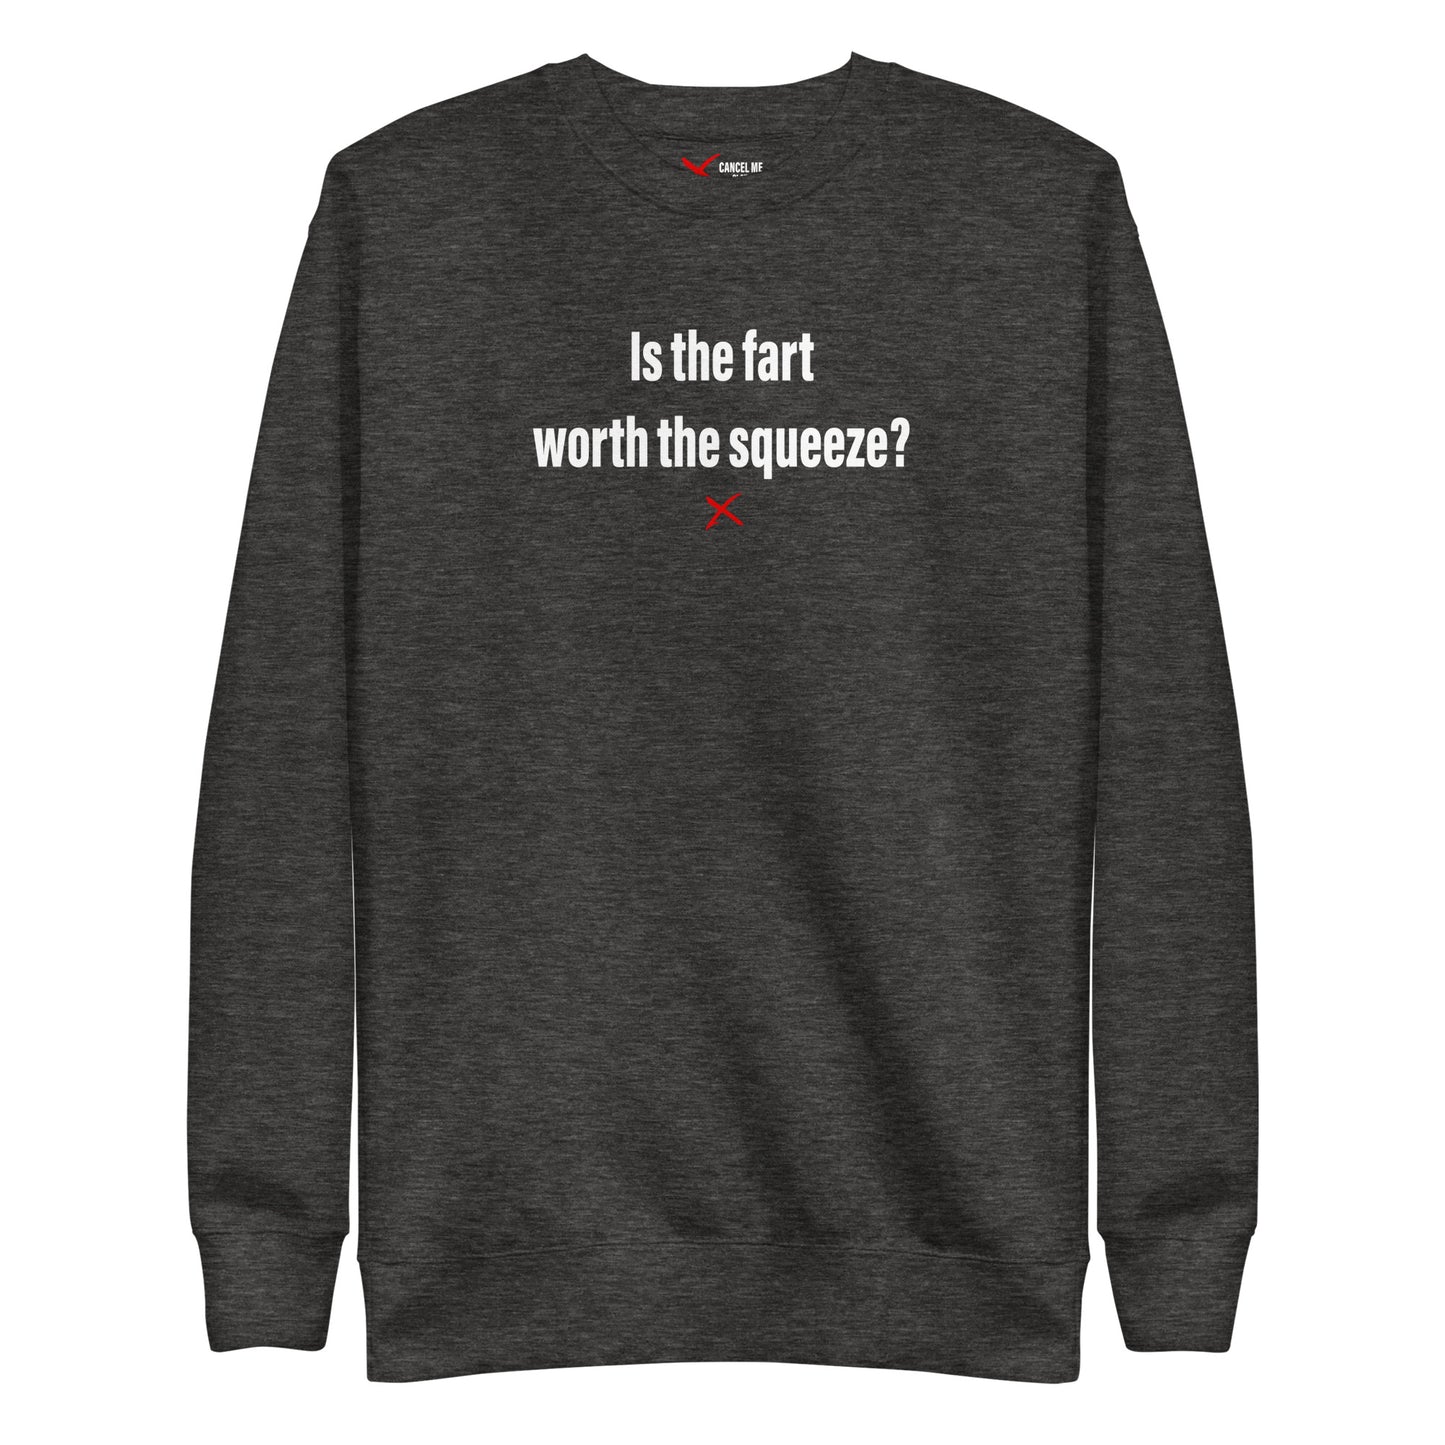 Is the fart worth the squeeze? - Sweatshirt